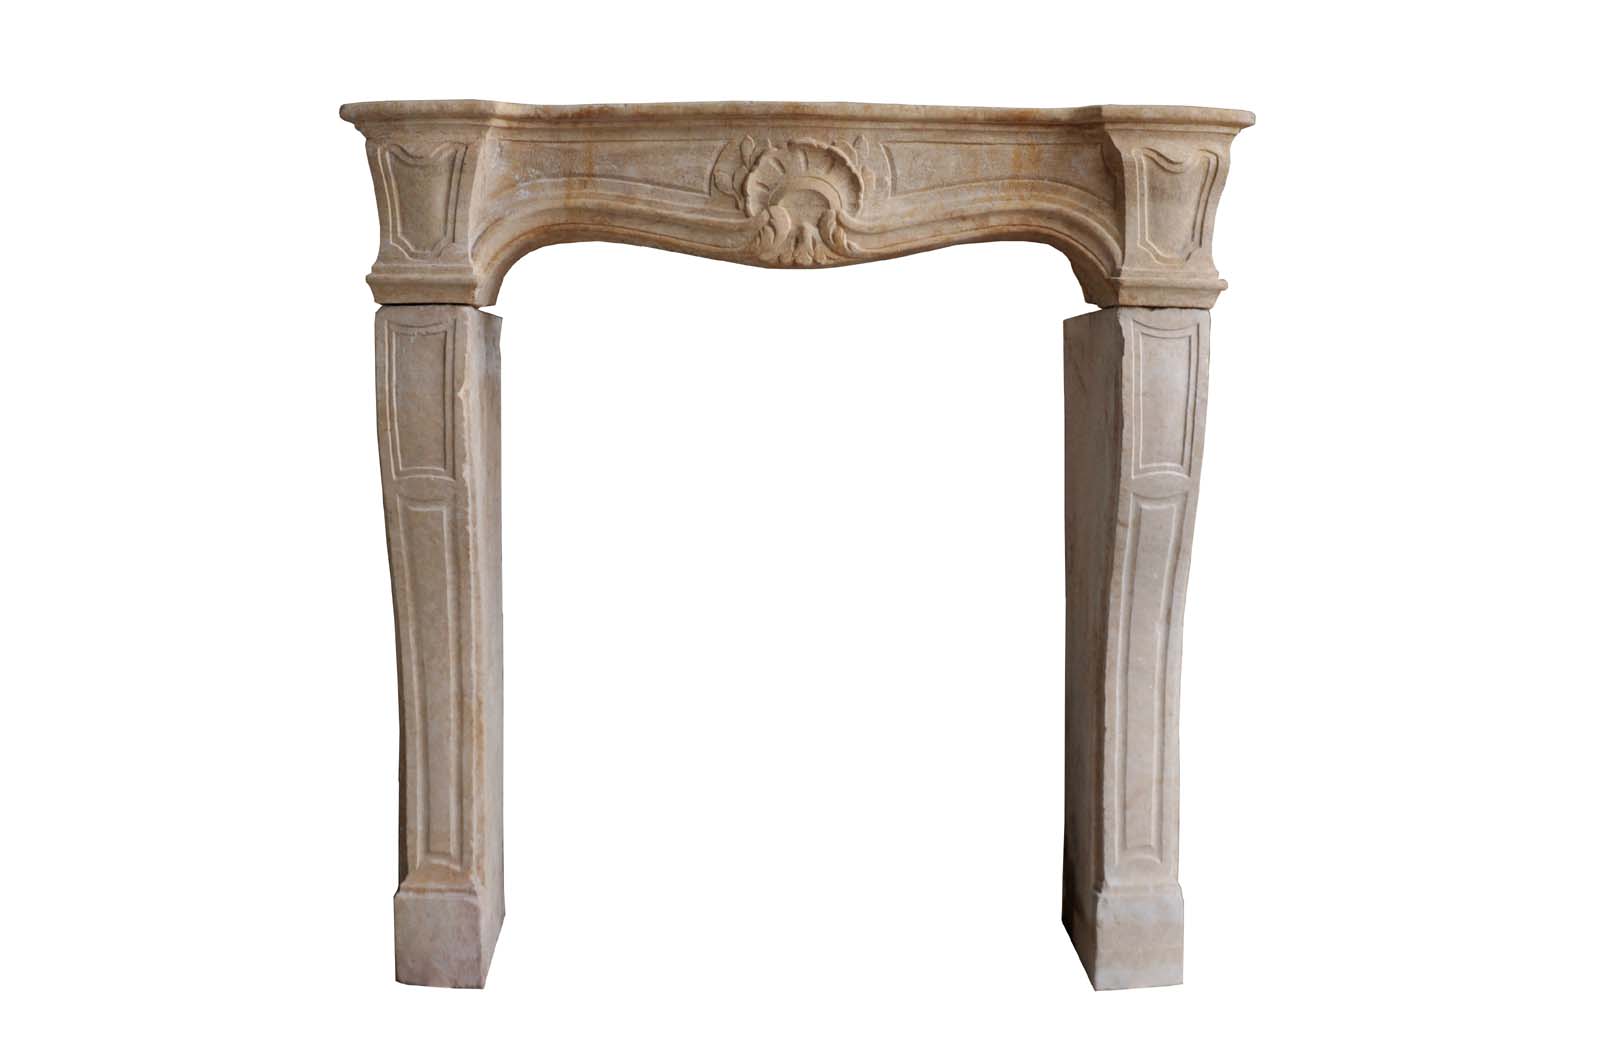 French Louis the 15th limestone fireplace - 18th century